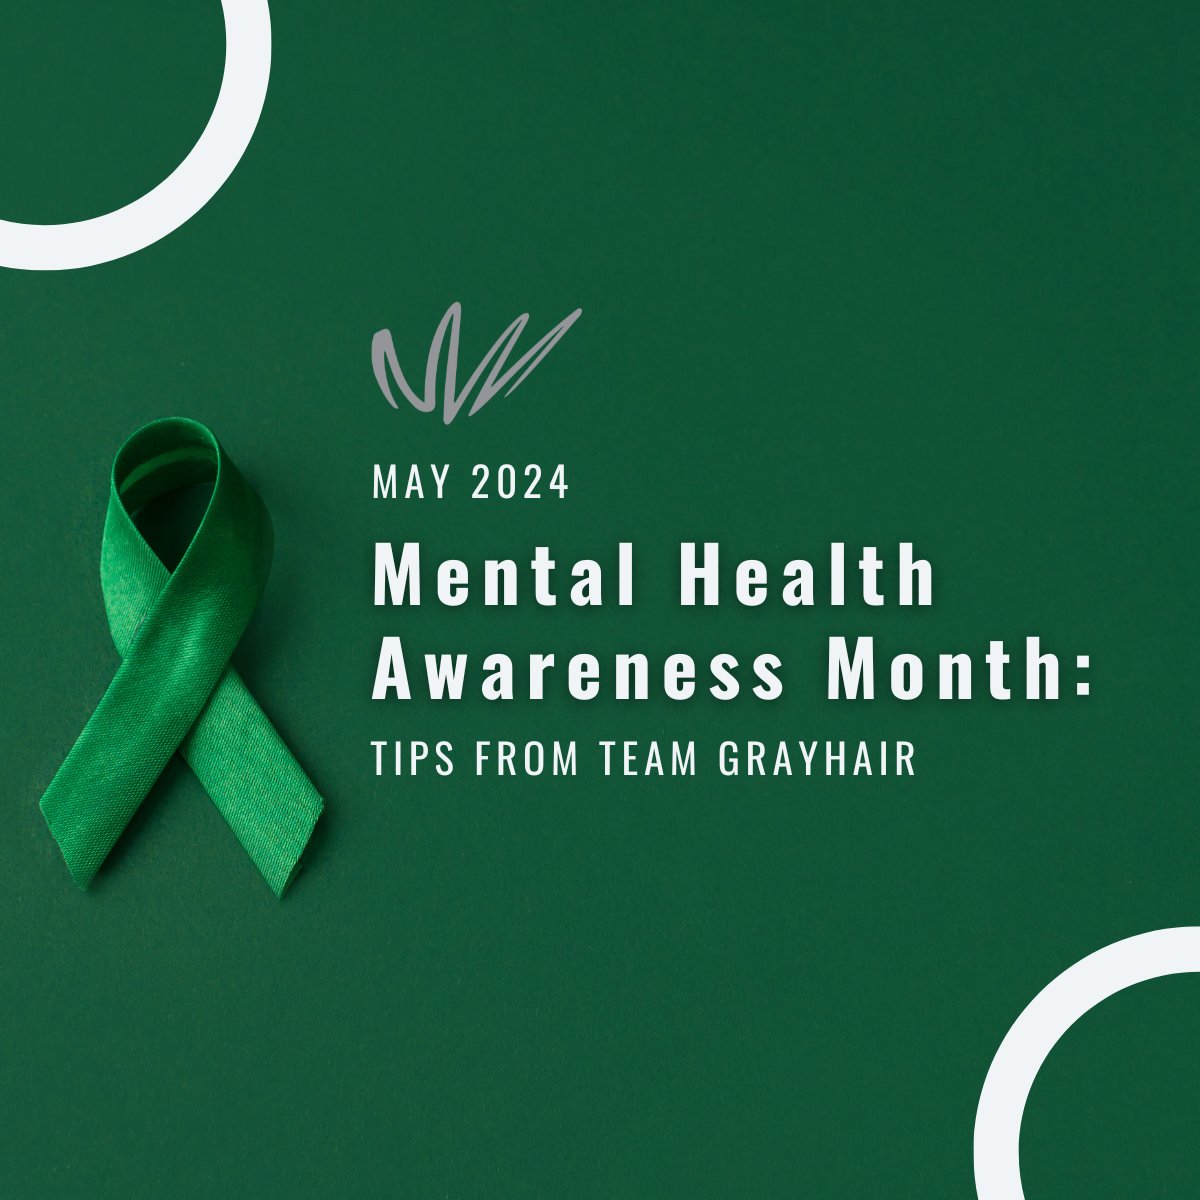 May is #MentalHealthAwarenessMonth, and at Team GrayHair, we're all about keeping our minds and spirits in tip-top shape! 💪Here are our top 5 practices:

😴 Getting rest
📵 Unplugging
🌳 Time outdoors
🏋️‍♂️ Exercising
🎶 Listening to tunes

What's your favorite way to recharge?